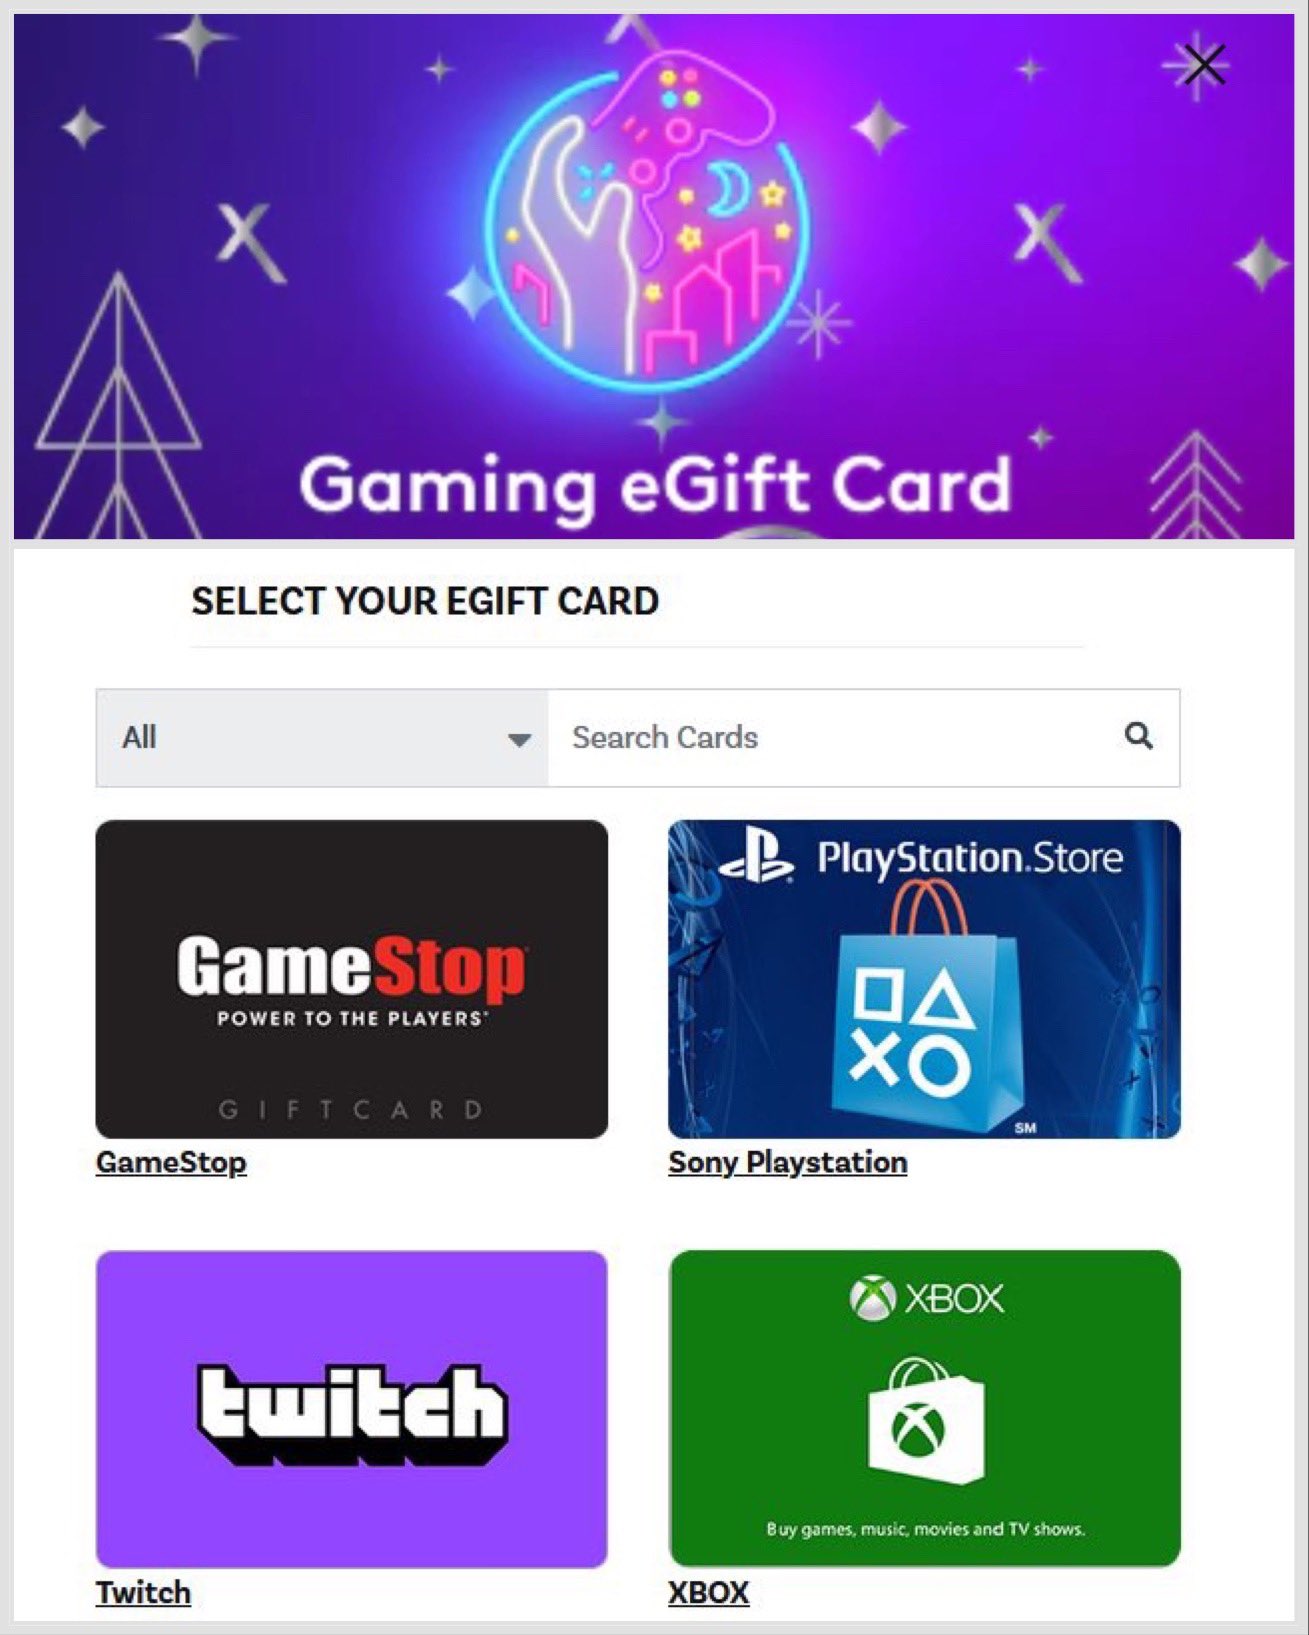 Select Xfinity Rewards Members: Get up to a $25 Gaming eGift Card